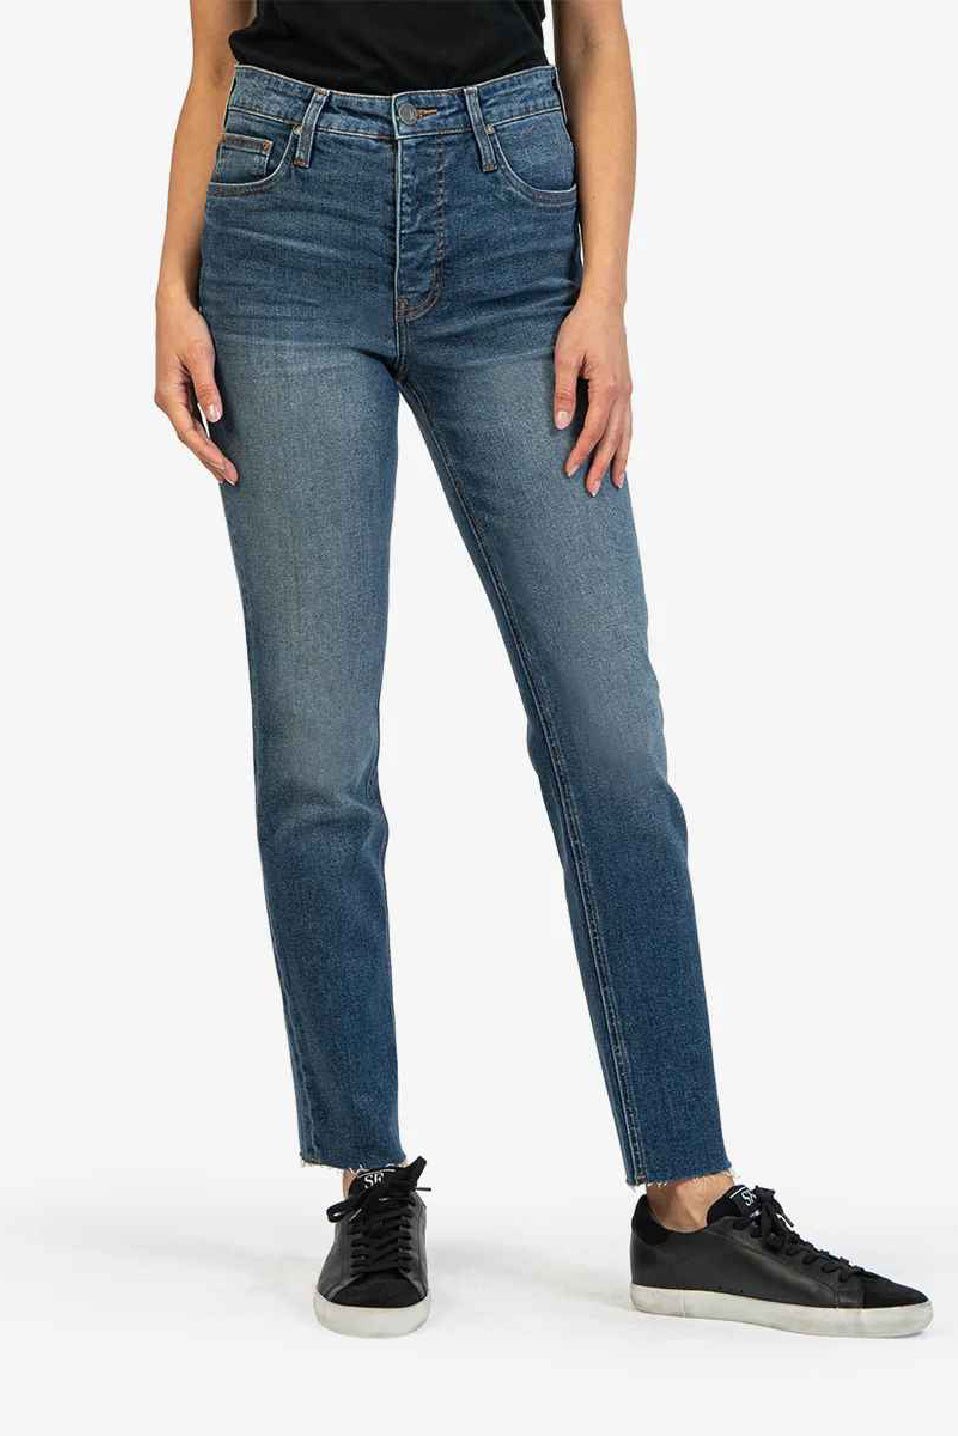 Kut From The Kloth Rachael High Rise  Mom Jeans (Within Wash)